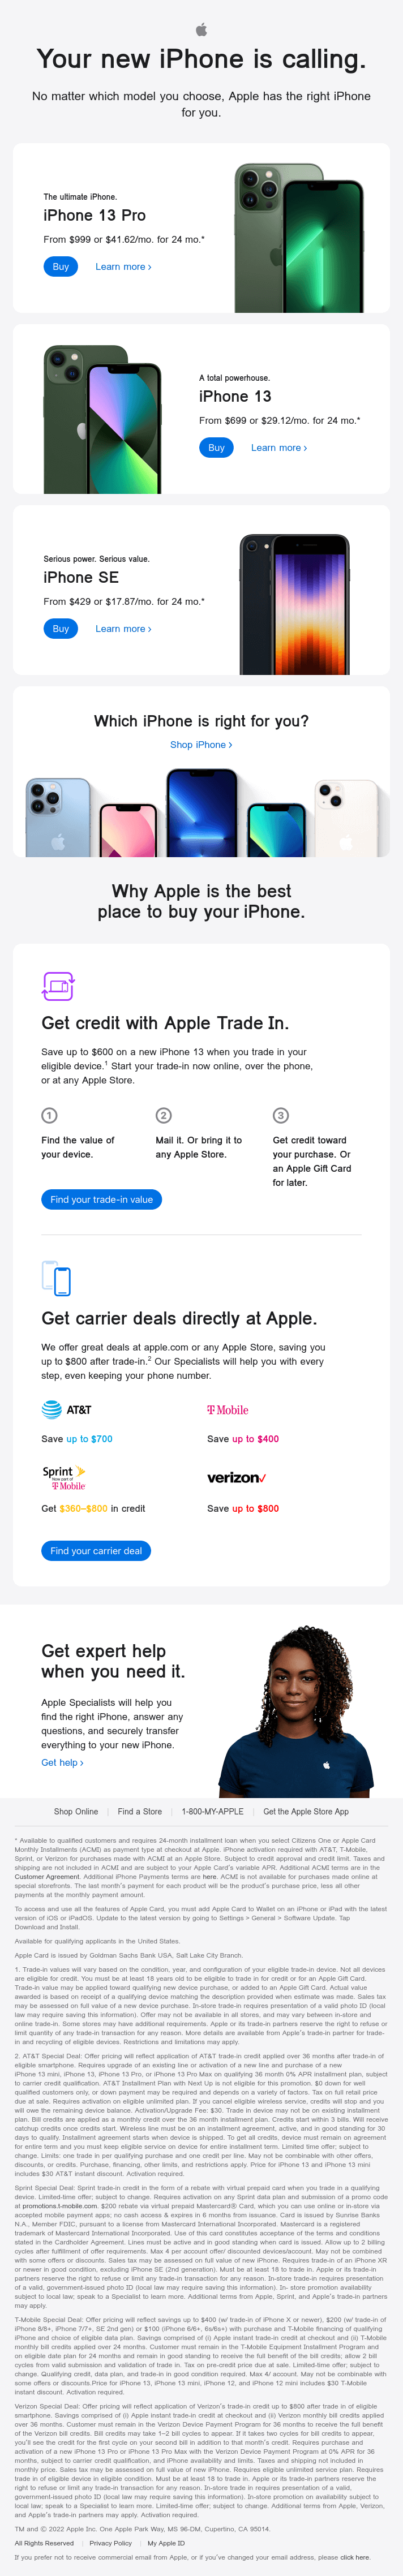 Discover your next iPhone at Apple. - Apple Email Newsletter